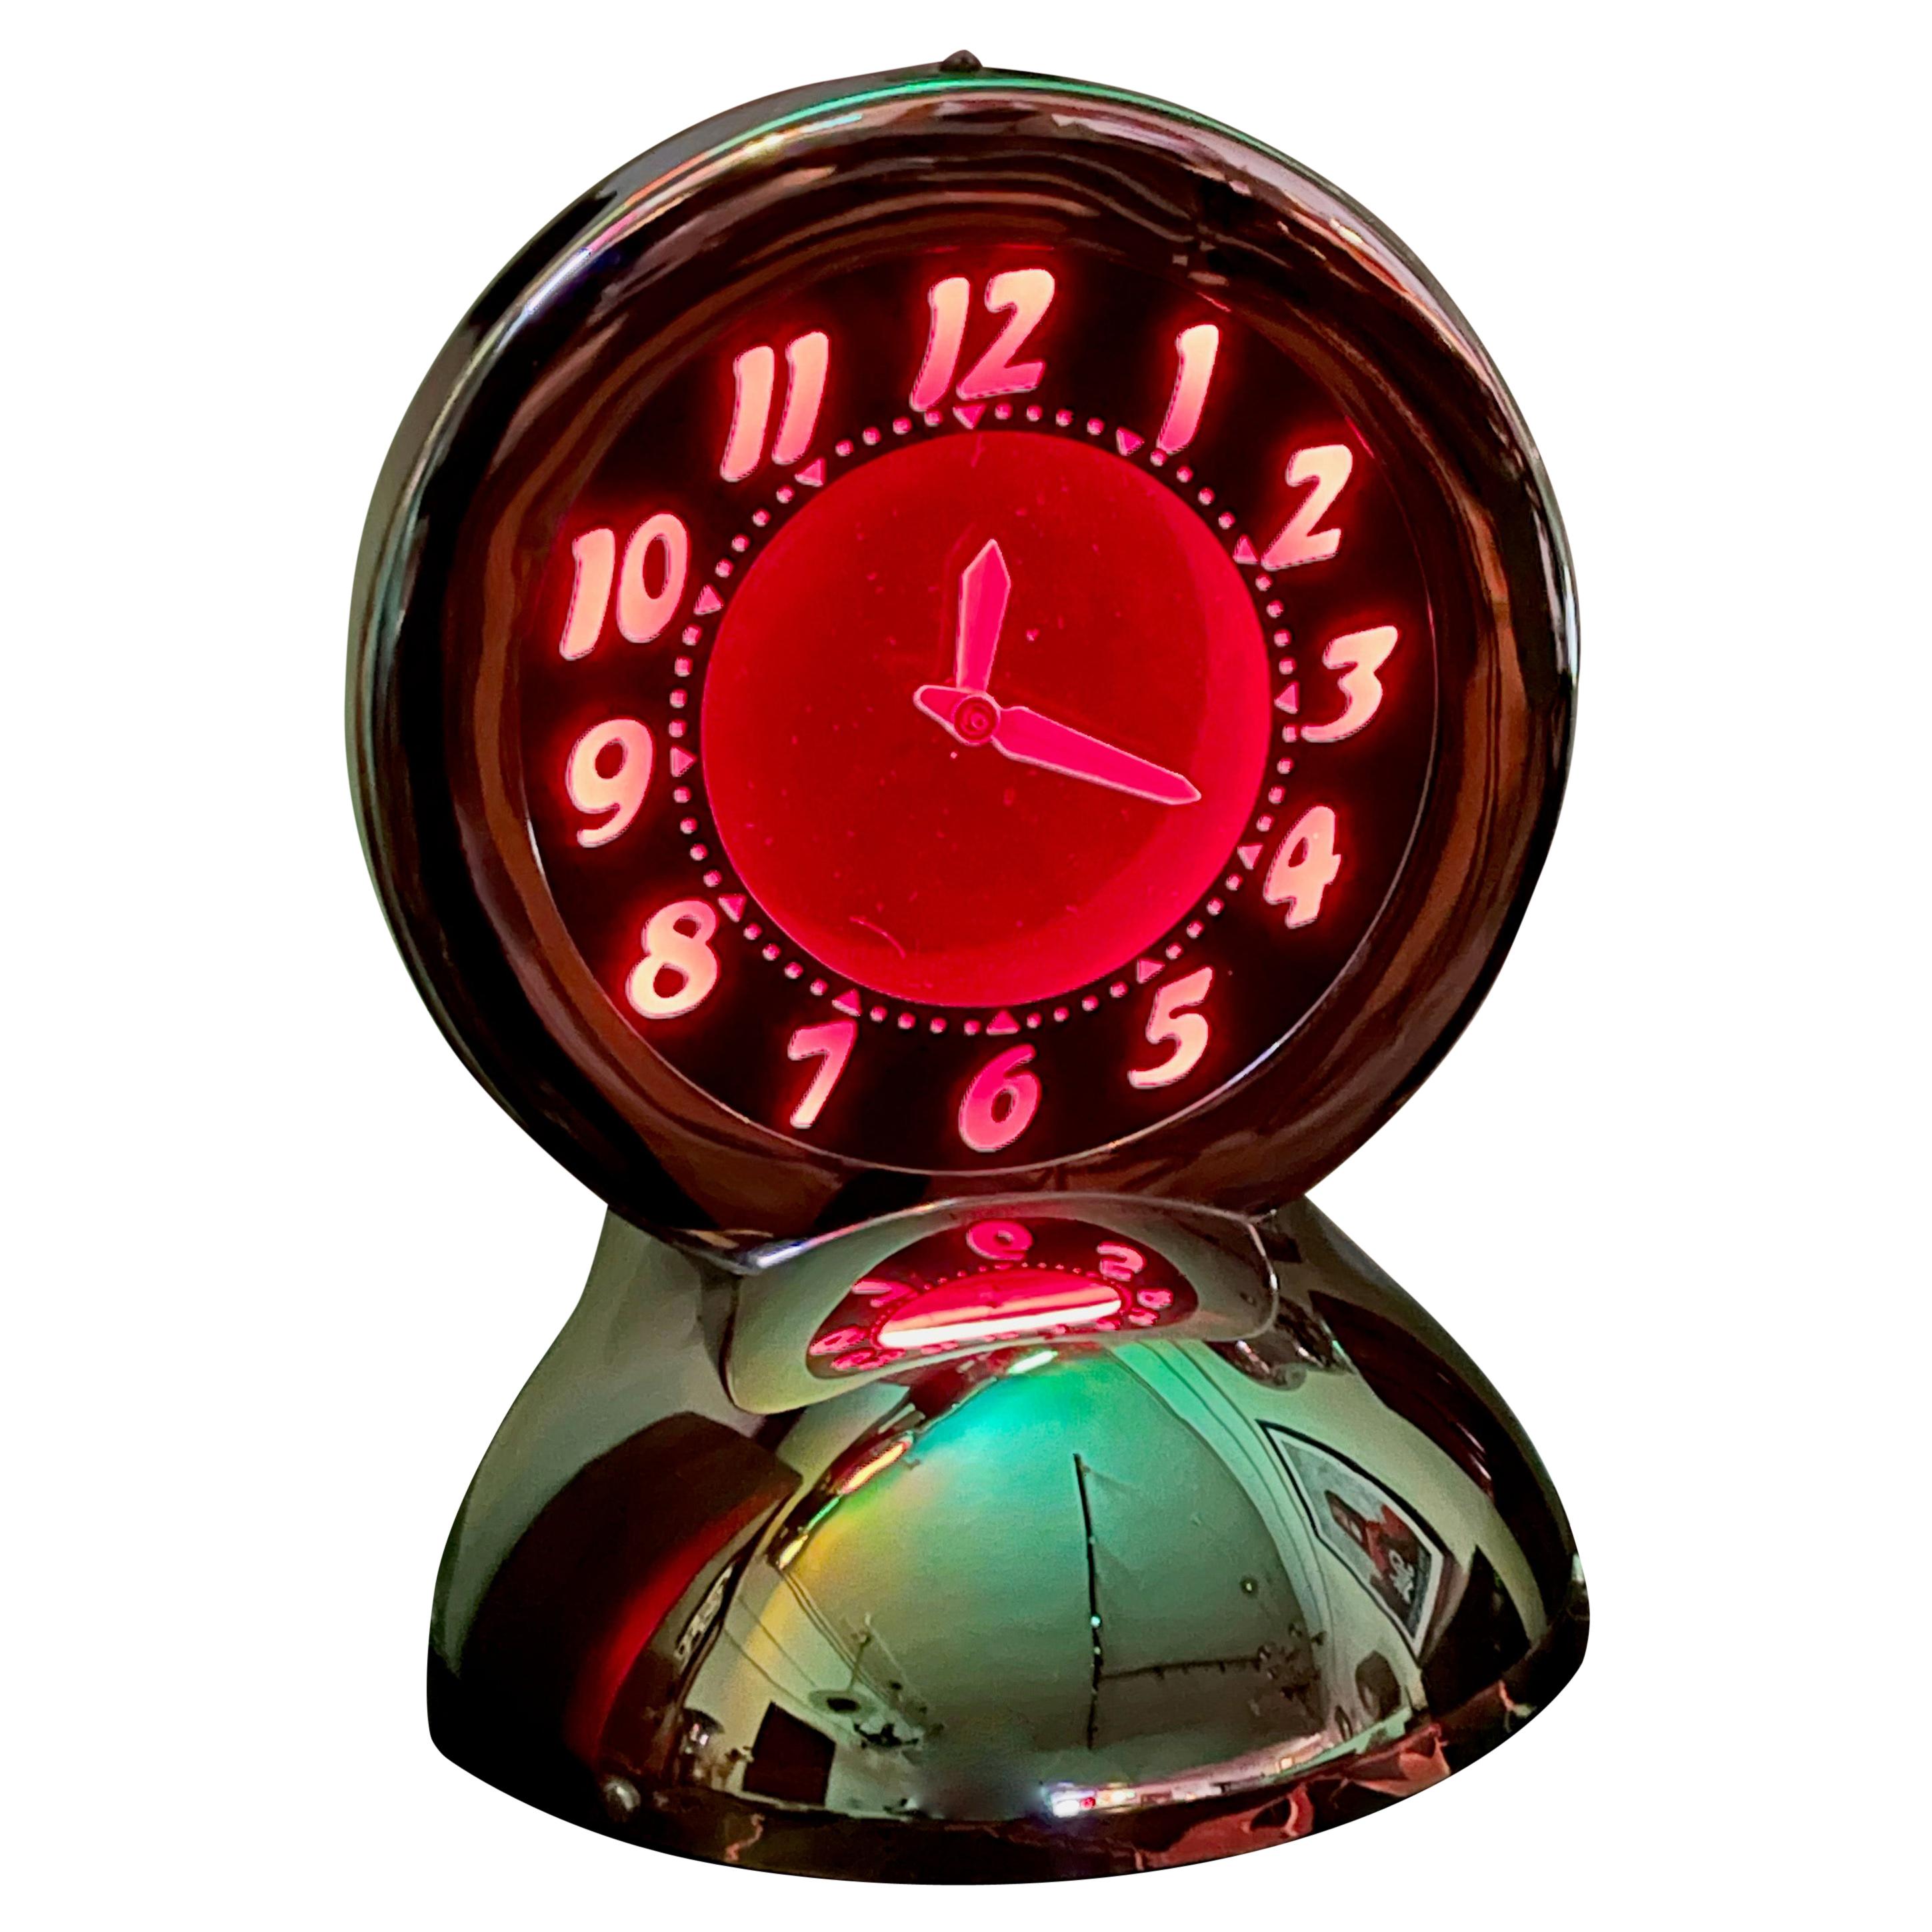 Glo Dial Neon Chrome Desk Clock with Ruby Red Neon